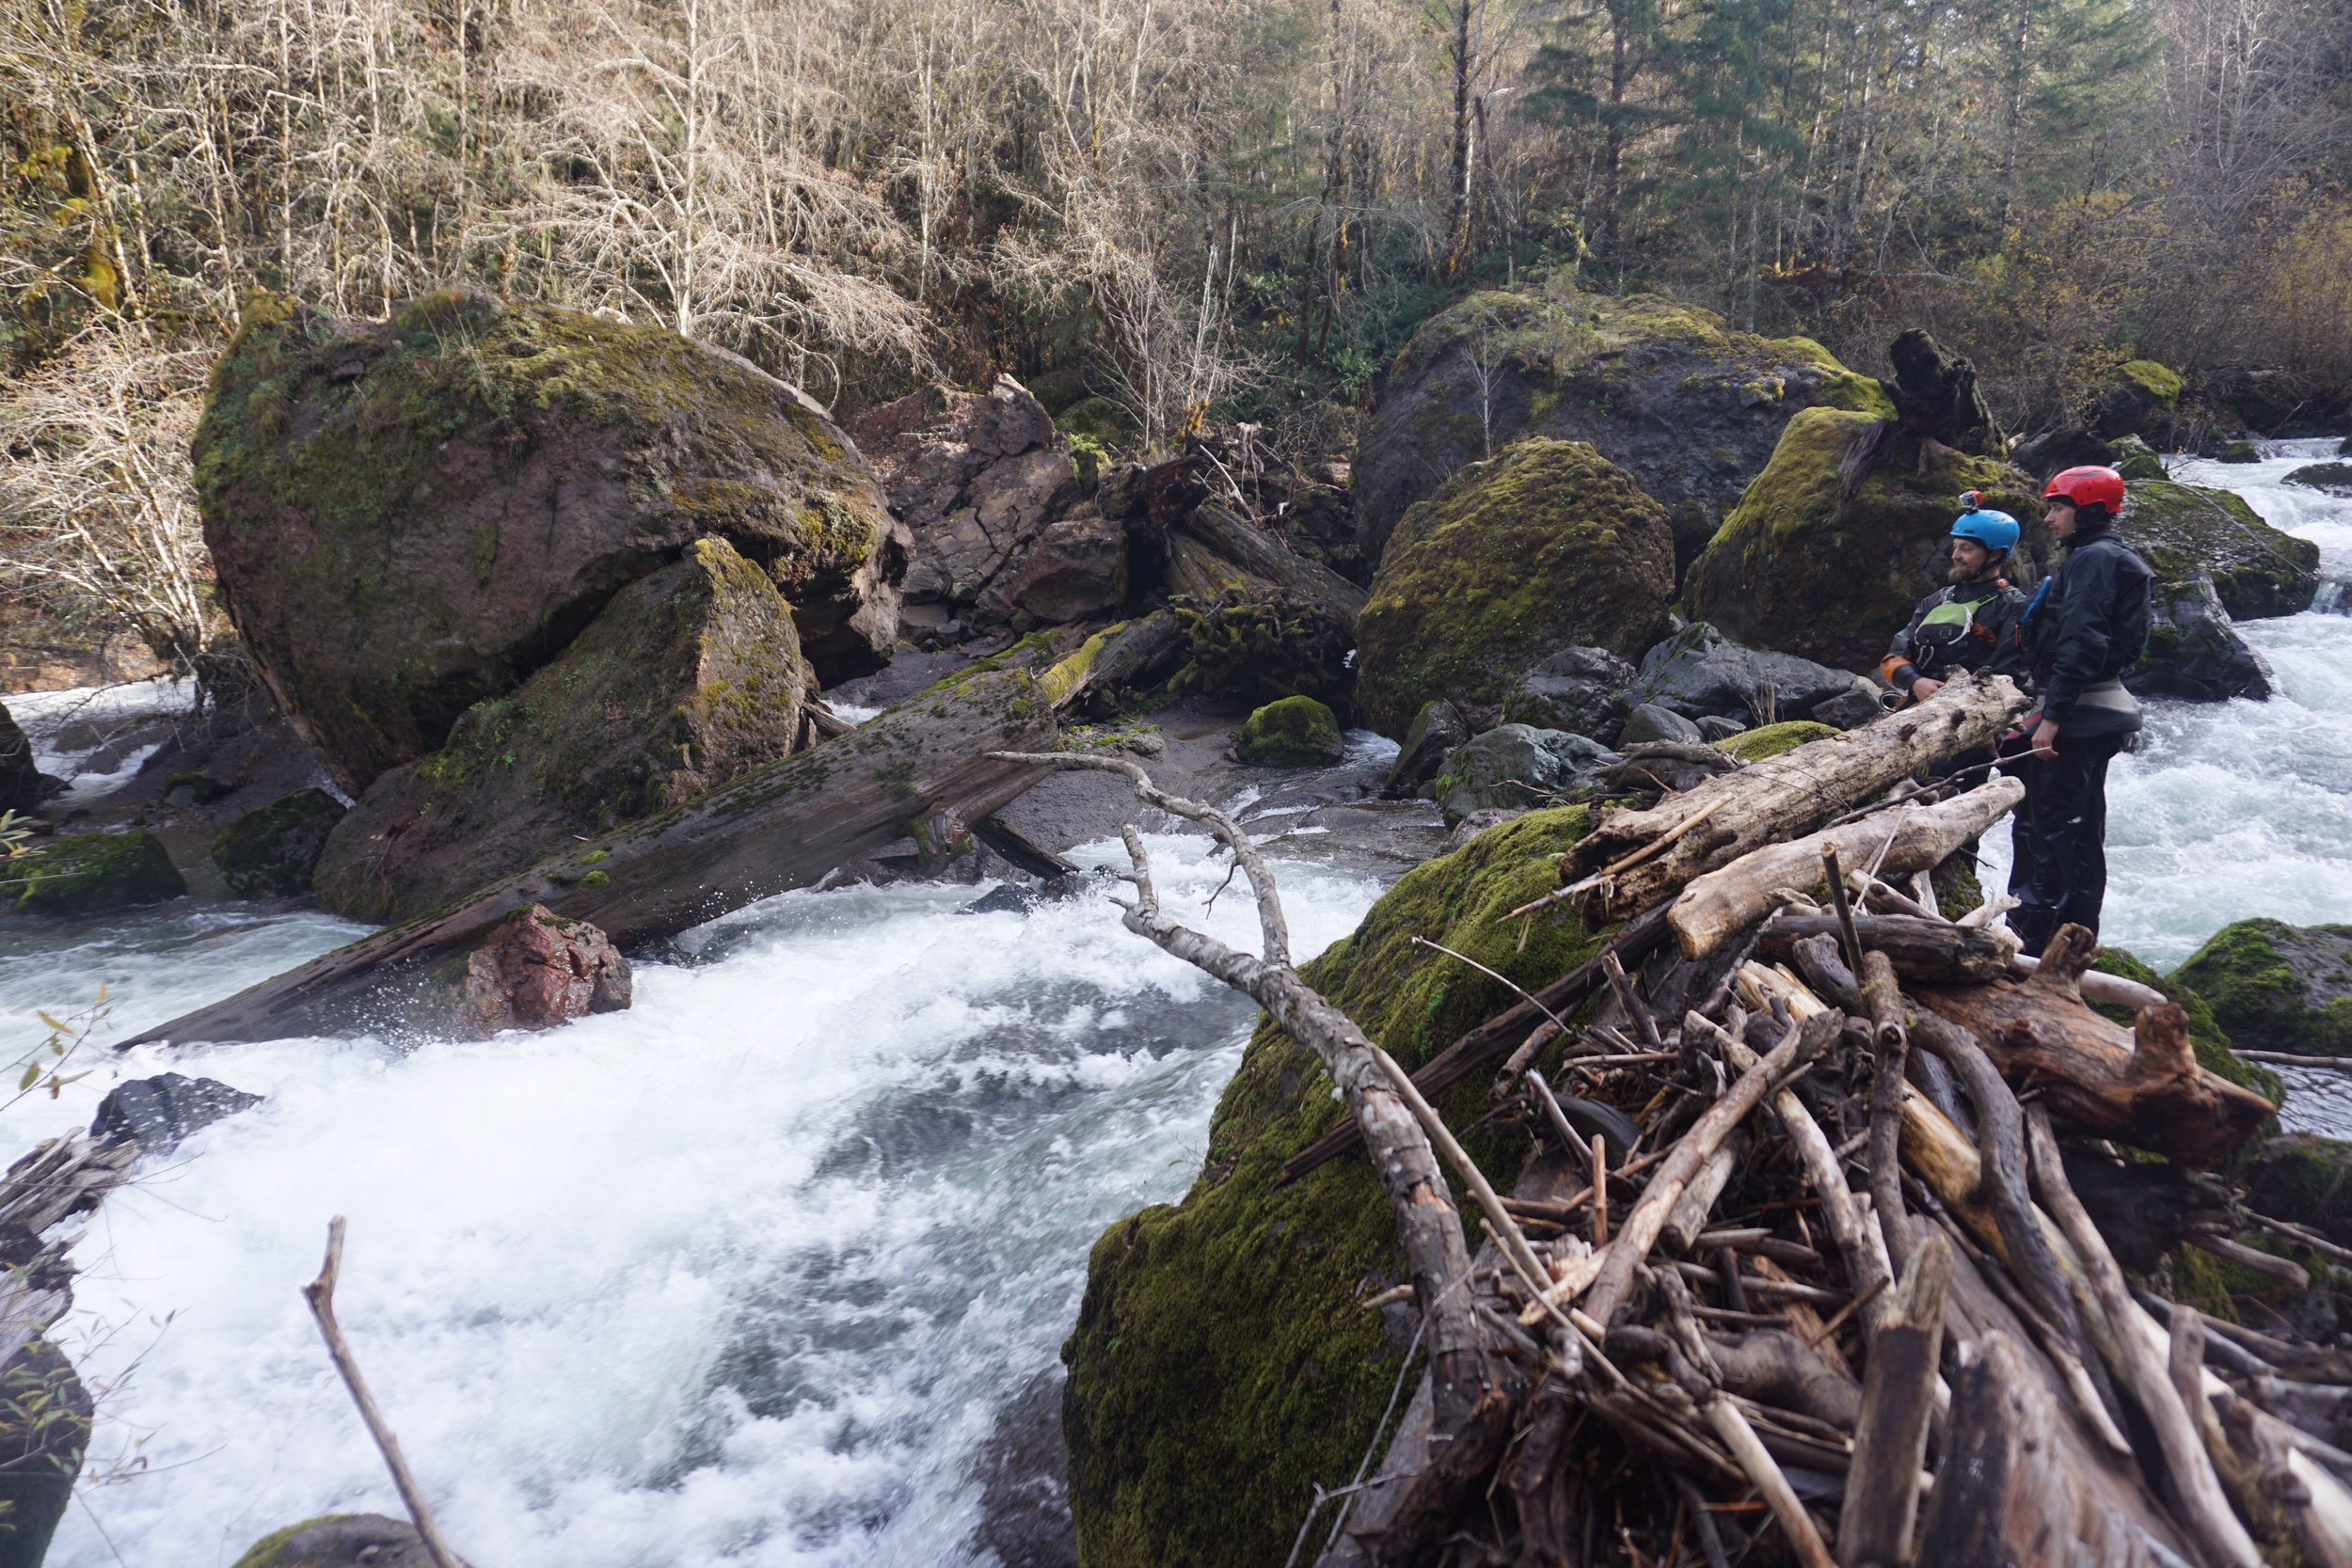 Scouting a rapid in Canyon Creek, Oregon. Photo courtesy of Adam Edwards.